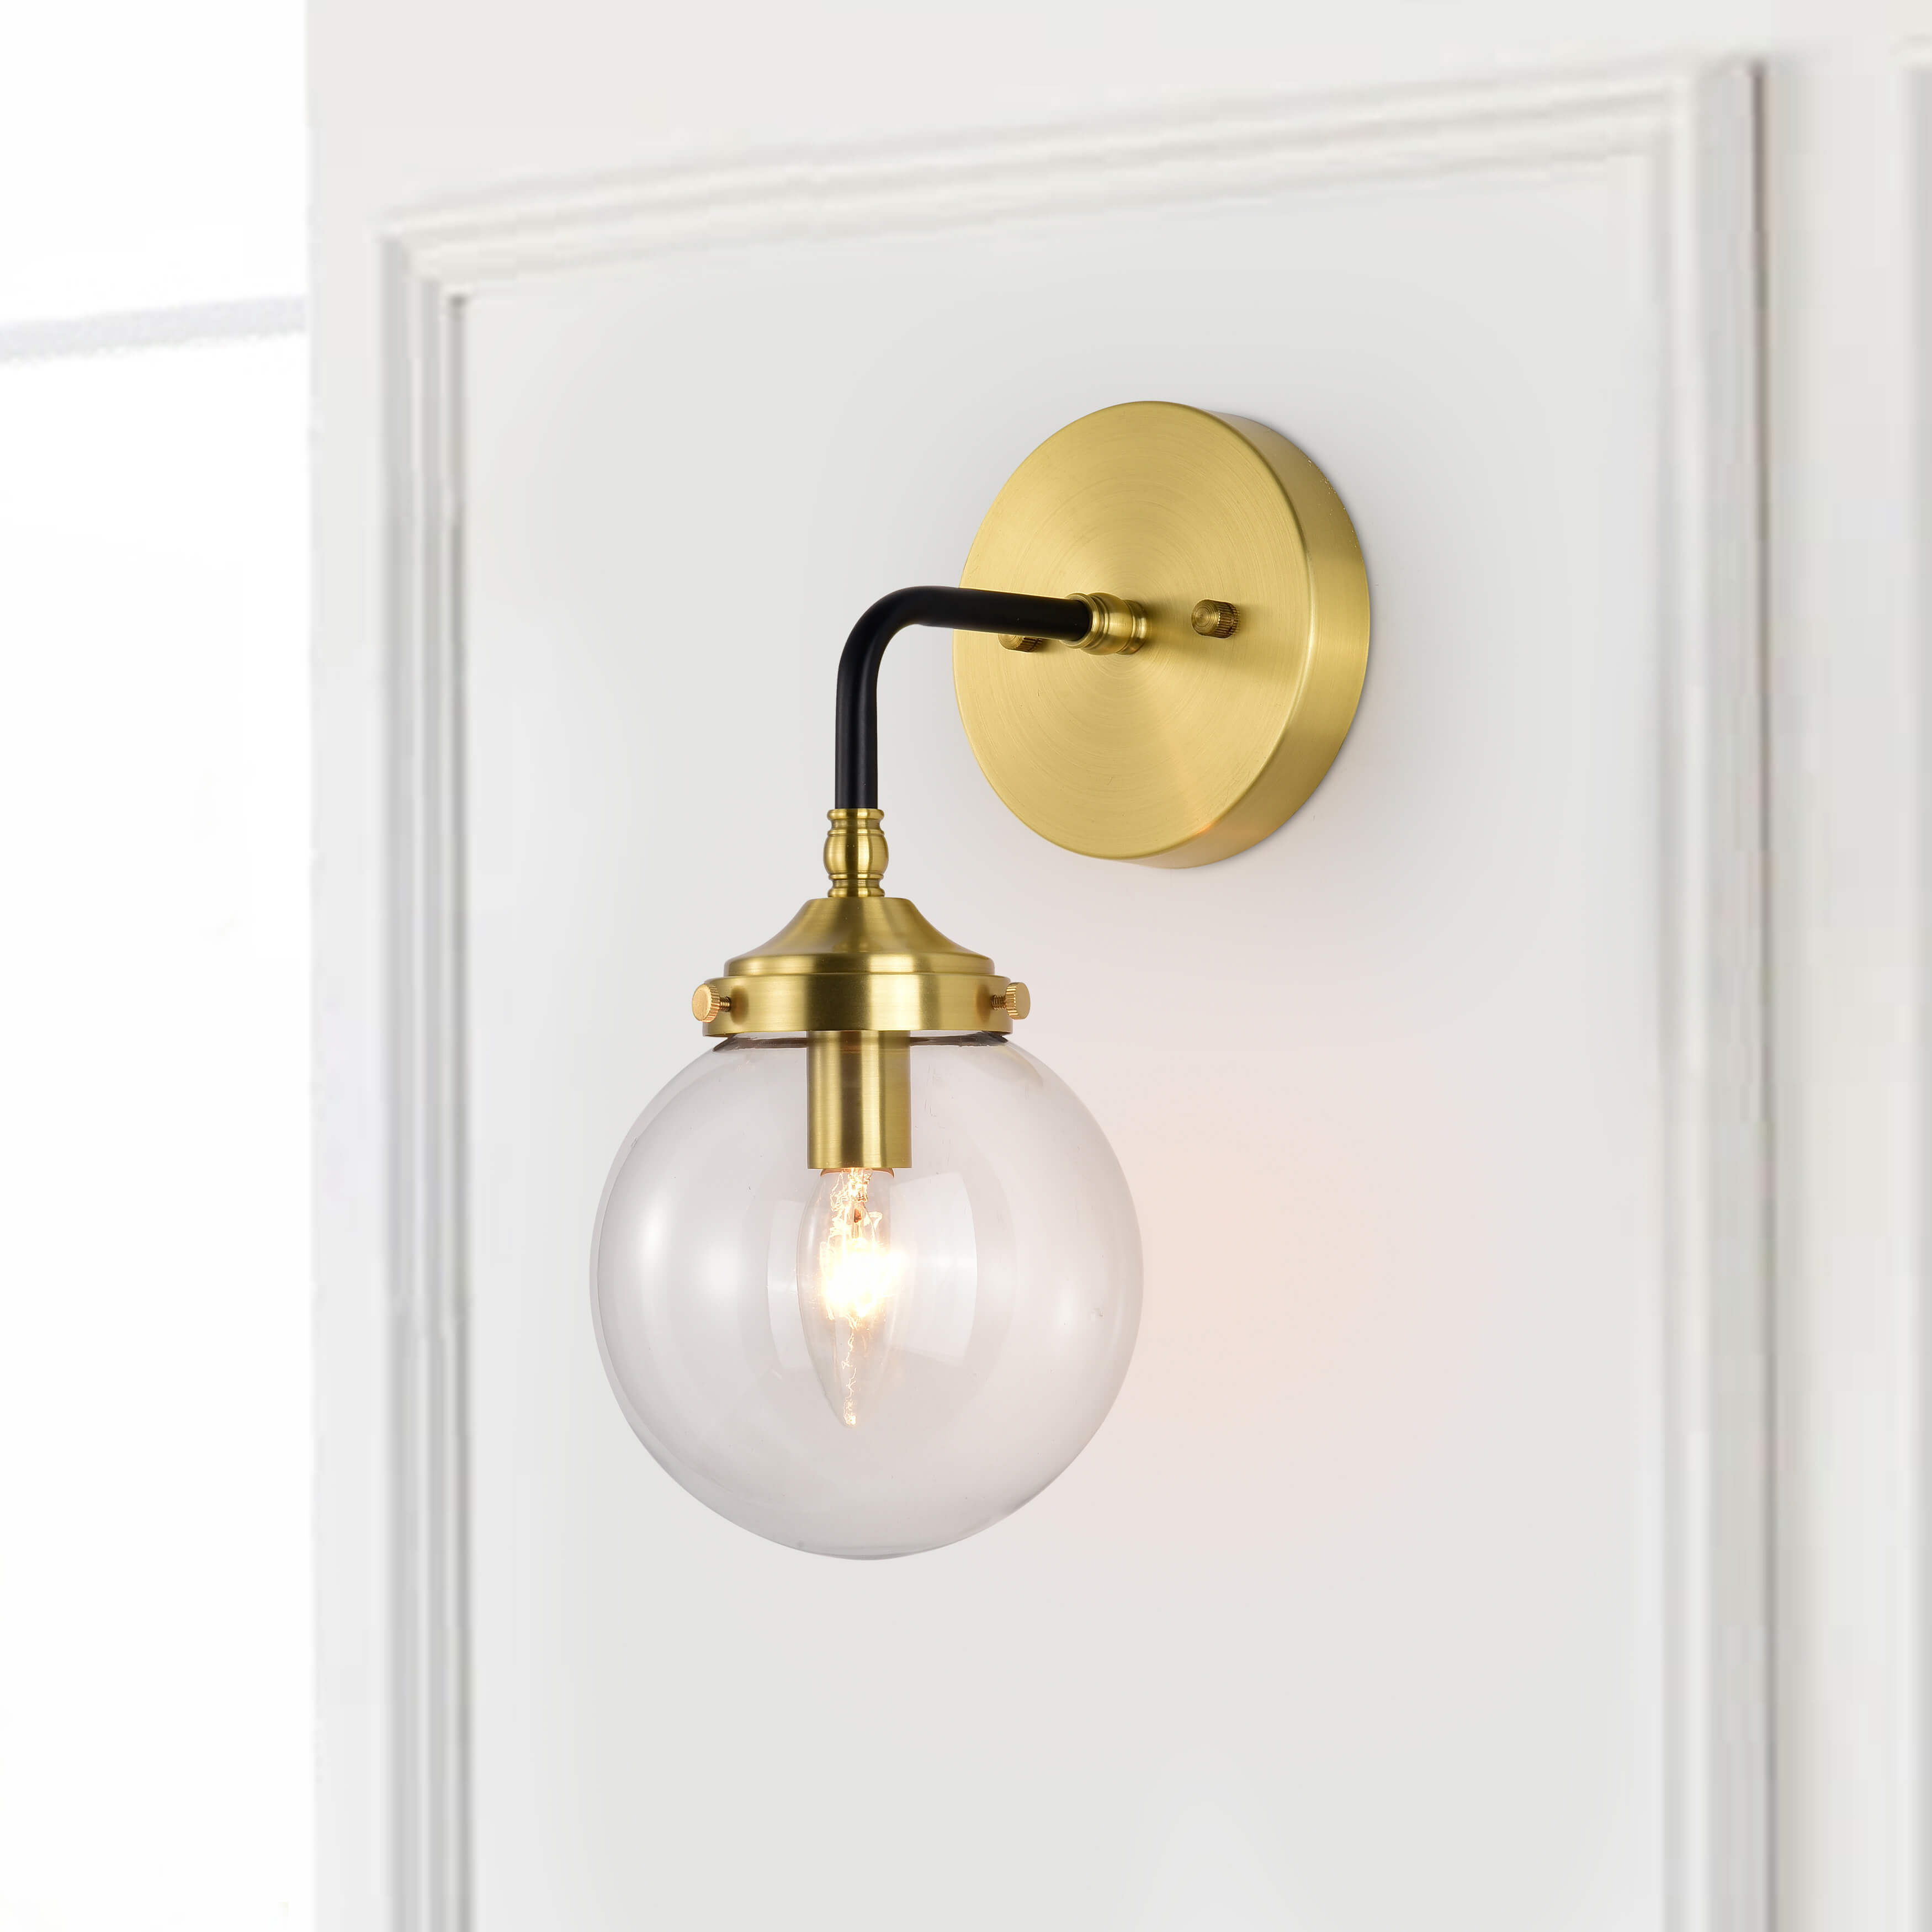 Alda Single light Antique Gold Wall Sconce with Clear Glass Globe LJ-6087-WCW